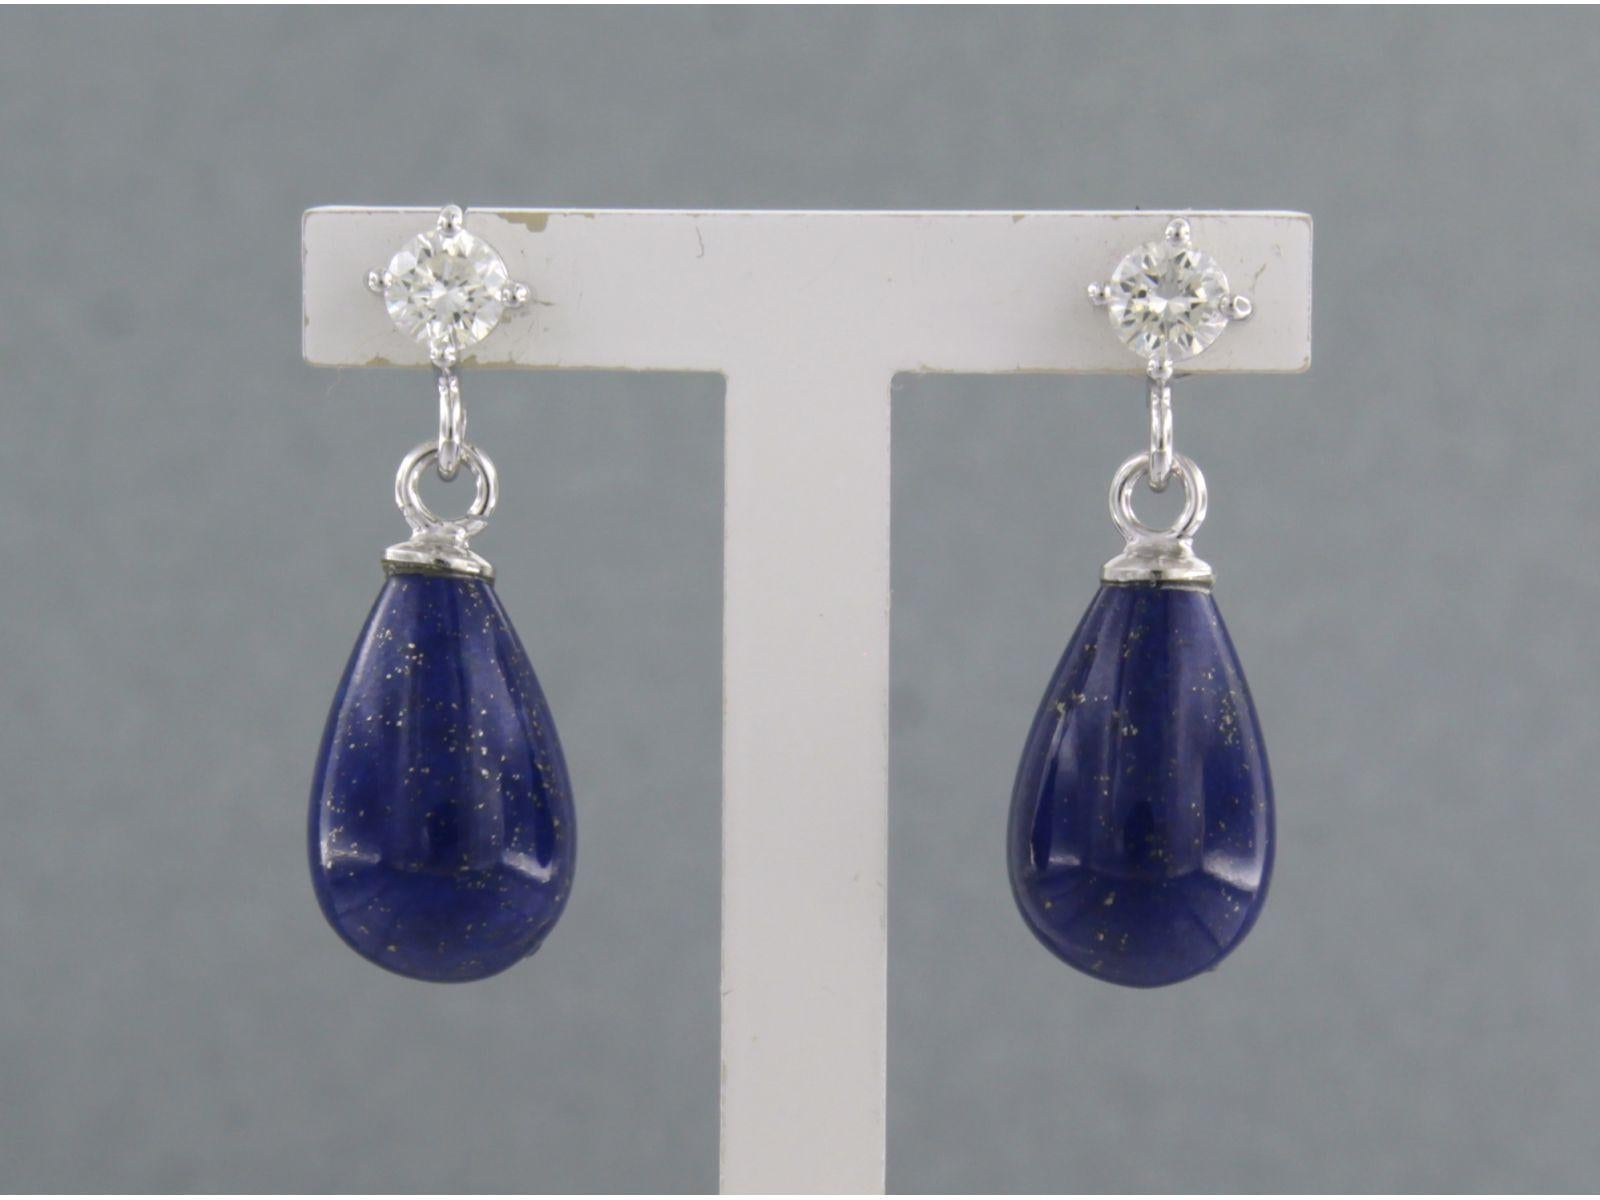 18k white gold earrings set with lapis lazuli and brilliant cut diamonds. 0.36ct - F/G - VS/SI

detailed description:

the size of the earring is 2.2 cm long by 8.2 mm wide

total weight: 4.2 grams

estimated gold weight 2.0 grams

occupied with:

-